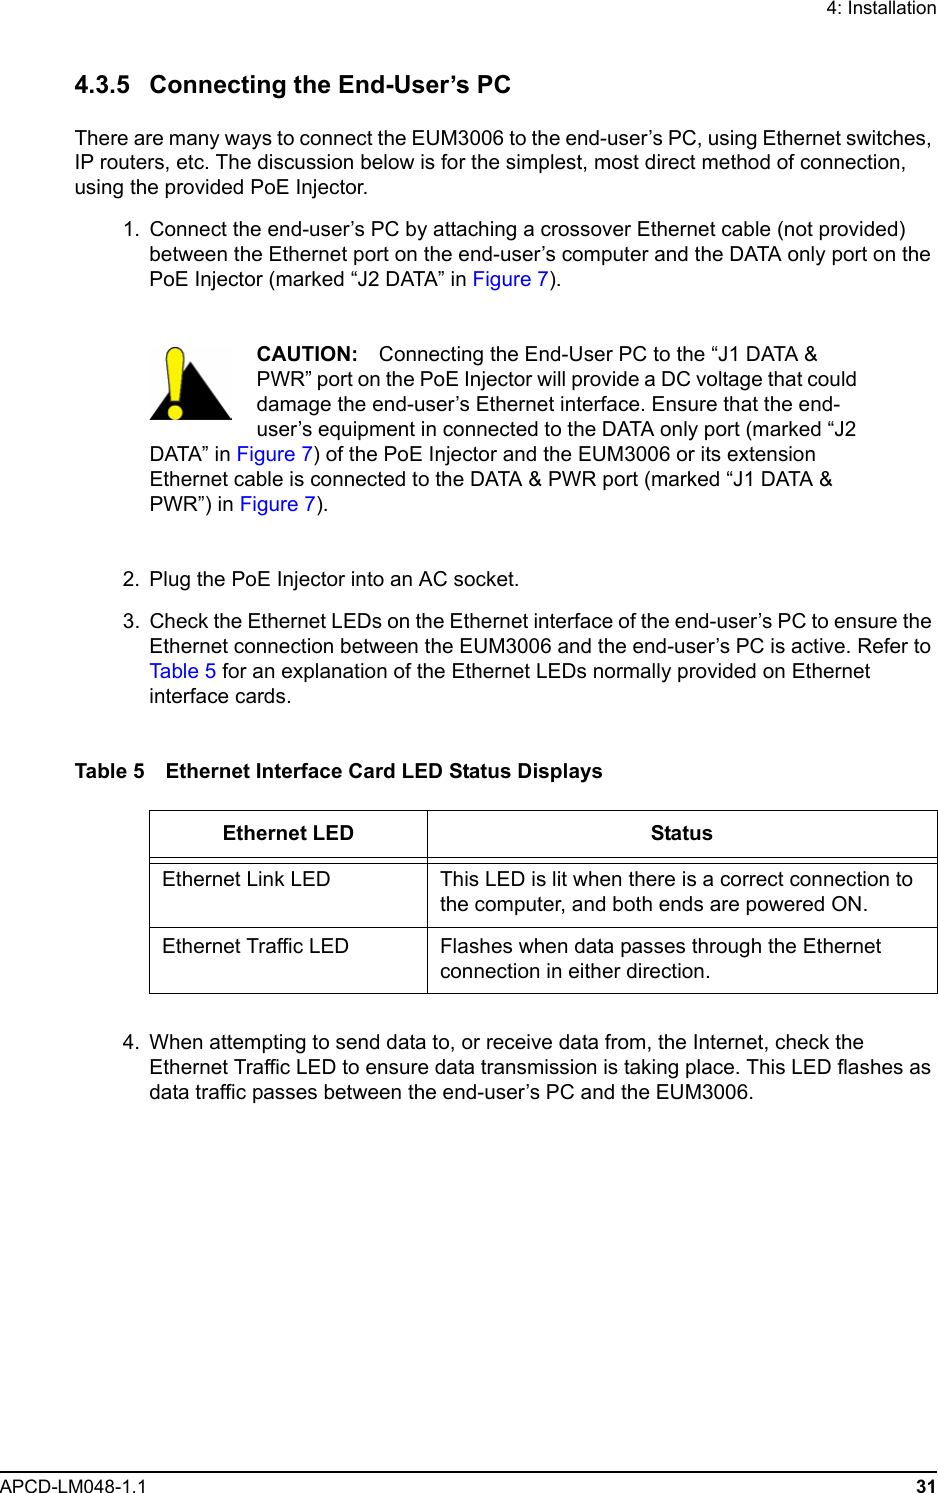 4: InstallationAPCD-LM048-1.1 314.3.5 Connecting the End-User’s PCThere are many ways to connect the EUM3006 to the end-user’s PC, using Ethernet switches, IP routers, etc. The discussion below is for the simplest, most direct method of connection, using the provided PoE Injector.  1.  Connect the end-user’s PC by attaching a crossover Ethernet cable (not provided) between the Ethernet port on the end-user’s computer and the DATA only port on the PoE Injector (marked “J2 DATA” in Figure 7).CAUTION: Connecting the End-User PC to the “J1 DATA &amp; PWR” port on the PoE Injector will provide a DC voltage that could damage the end-user’s Ethernet interface. Ensure that the end-user’s equipment in connected to the DATA only port (marked “J2 DATA” in Figure 7) of the PoE Injector and the EUM3006 or its extension Ethernet cable is connected to the DATA &amp; PWR port (marked “J1 DATA &amp; PWR”) in Figure 7).  2. Plug the PoE Injector into an AC socket.  3. Check the Ethernet LEDs on the Ethernet interface of the end-user’s PC to ensure the Ethernet connection between the EUM3006 and the end-user’s PC is active. Refer to Tab le  5  for an explanation of the Ethernet LEDs normally provided on Ethernet interface cards.Table 5 Ethernet Interface Card LED Status Displays  4. When attempting to send data to, or receive data from, the Internet, check the Ethernet Traffic LED to ensure data transmission is taking place. This LED flashes as data traffic passes between the end-user’s PC and the EUM3006.Ethernet LED StatusEthernet Link LED This LED is lit when there is a correct connection to the computer, and both ends are powered ON.Ethernet Traffic LED Flashes when data passes through the Ethernet connection in either direction.